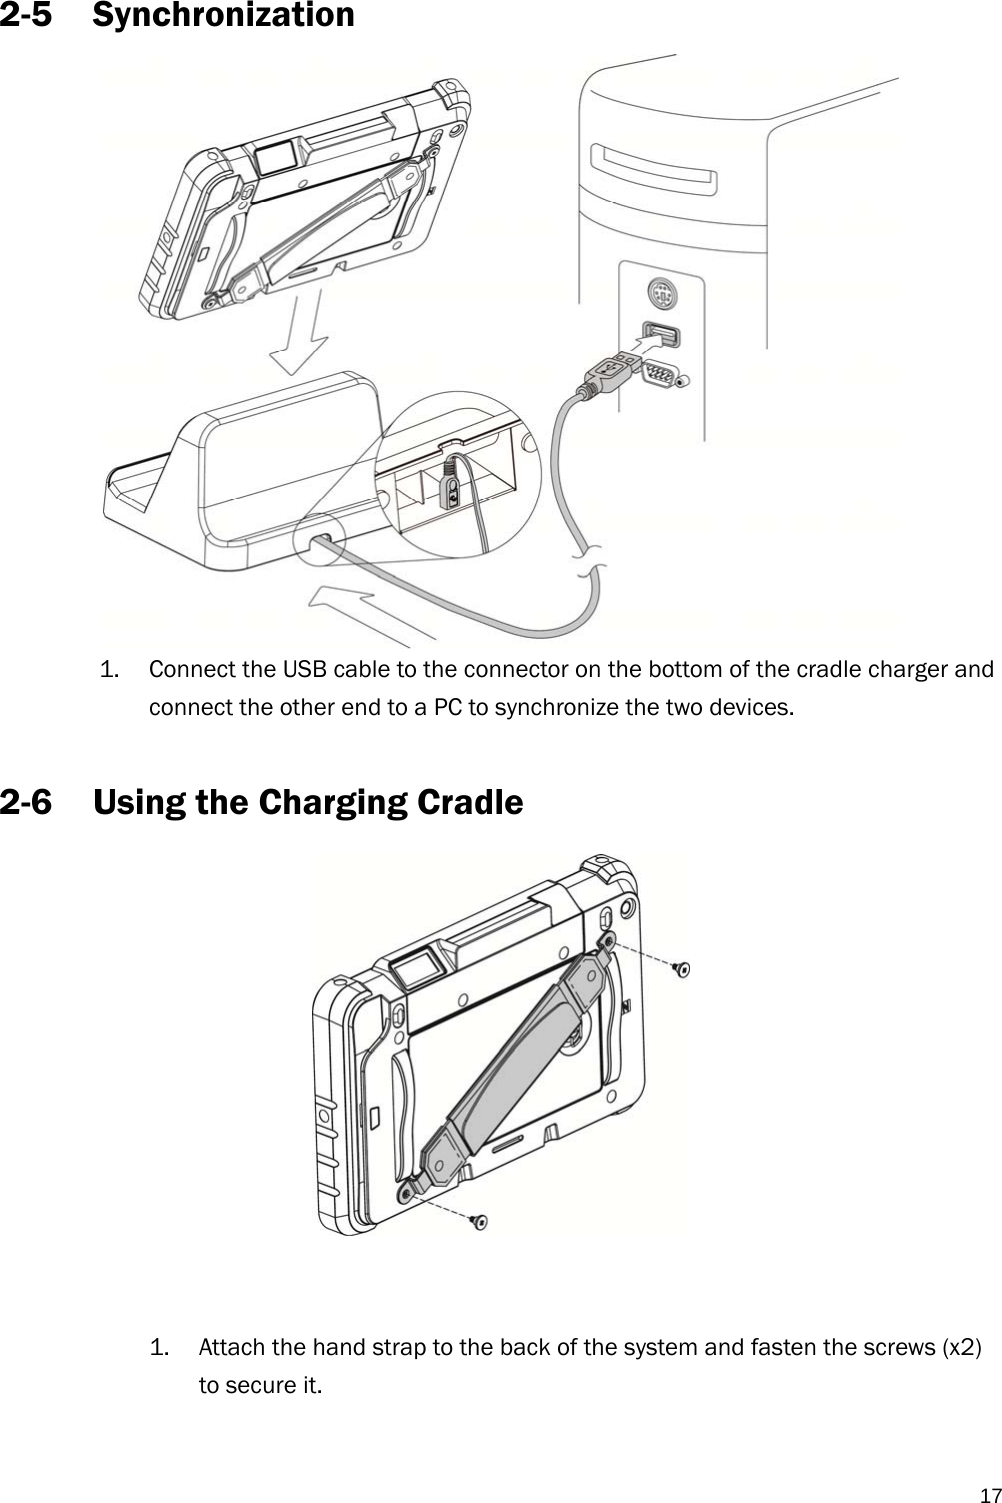   172-5 Synchronization   1. Connect the USB cable to the connector on the bottom of the cradle charger and connect the other end to a PC to synchronize the two devices.  2-6 Using the Charging Cradle    1. Attach the hand strap to the back of the system and fasten the screws (x2) to secure it. 